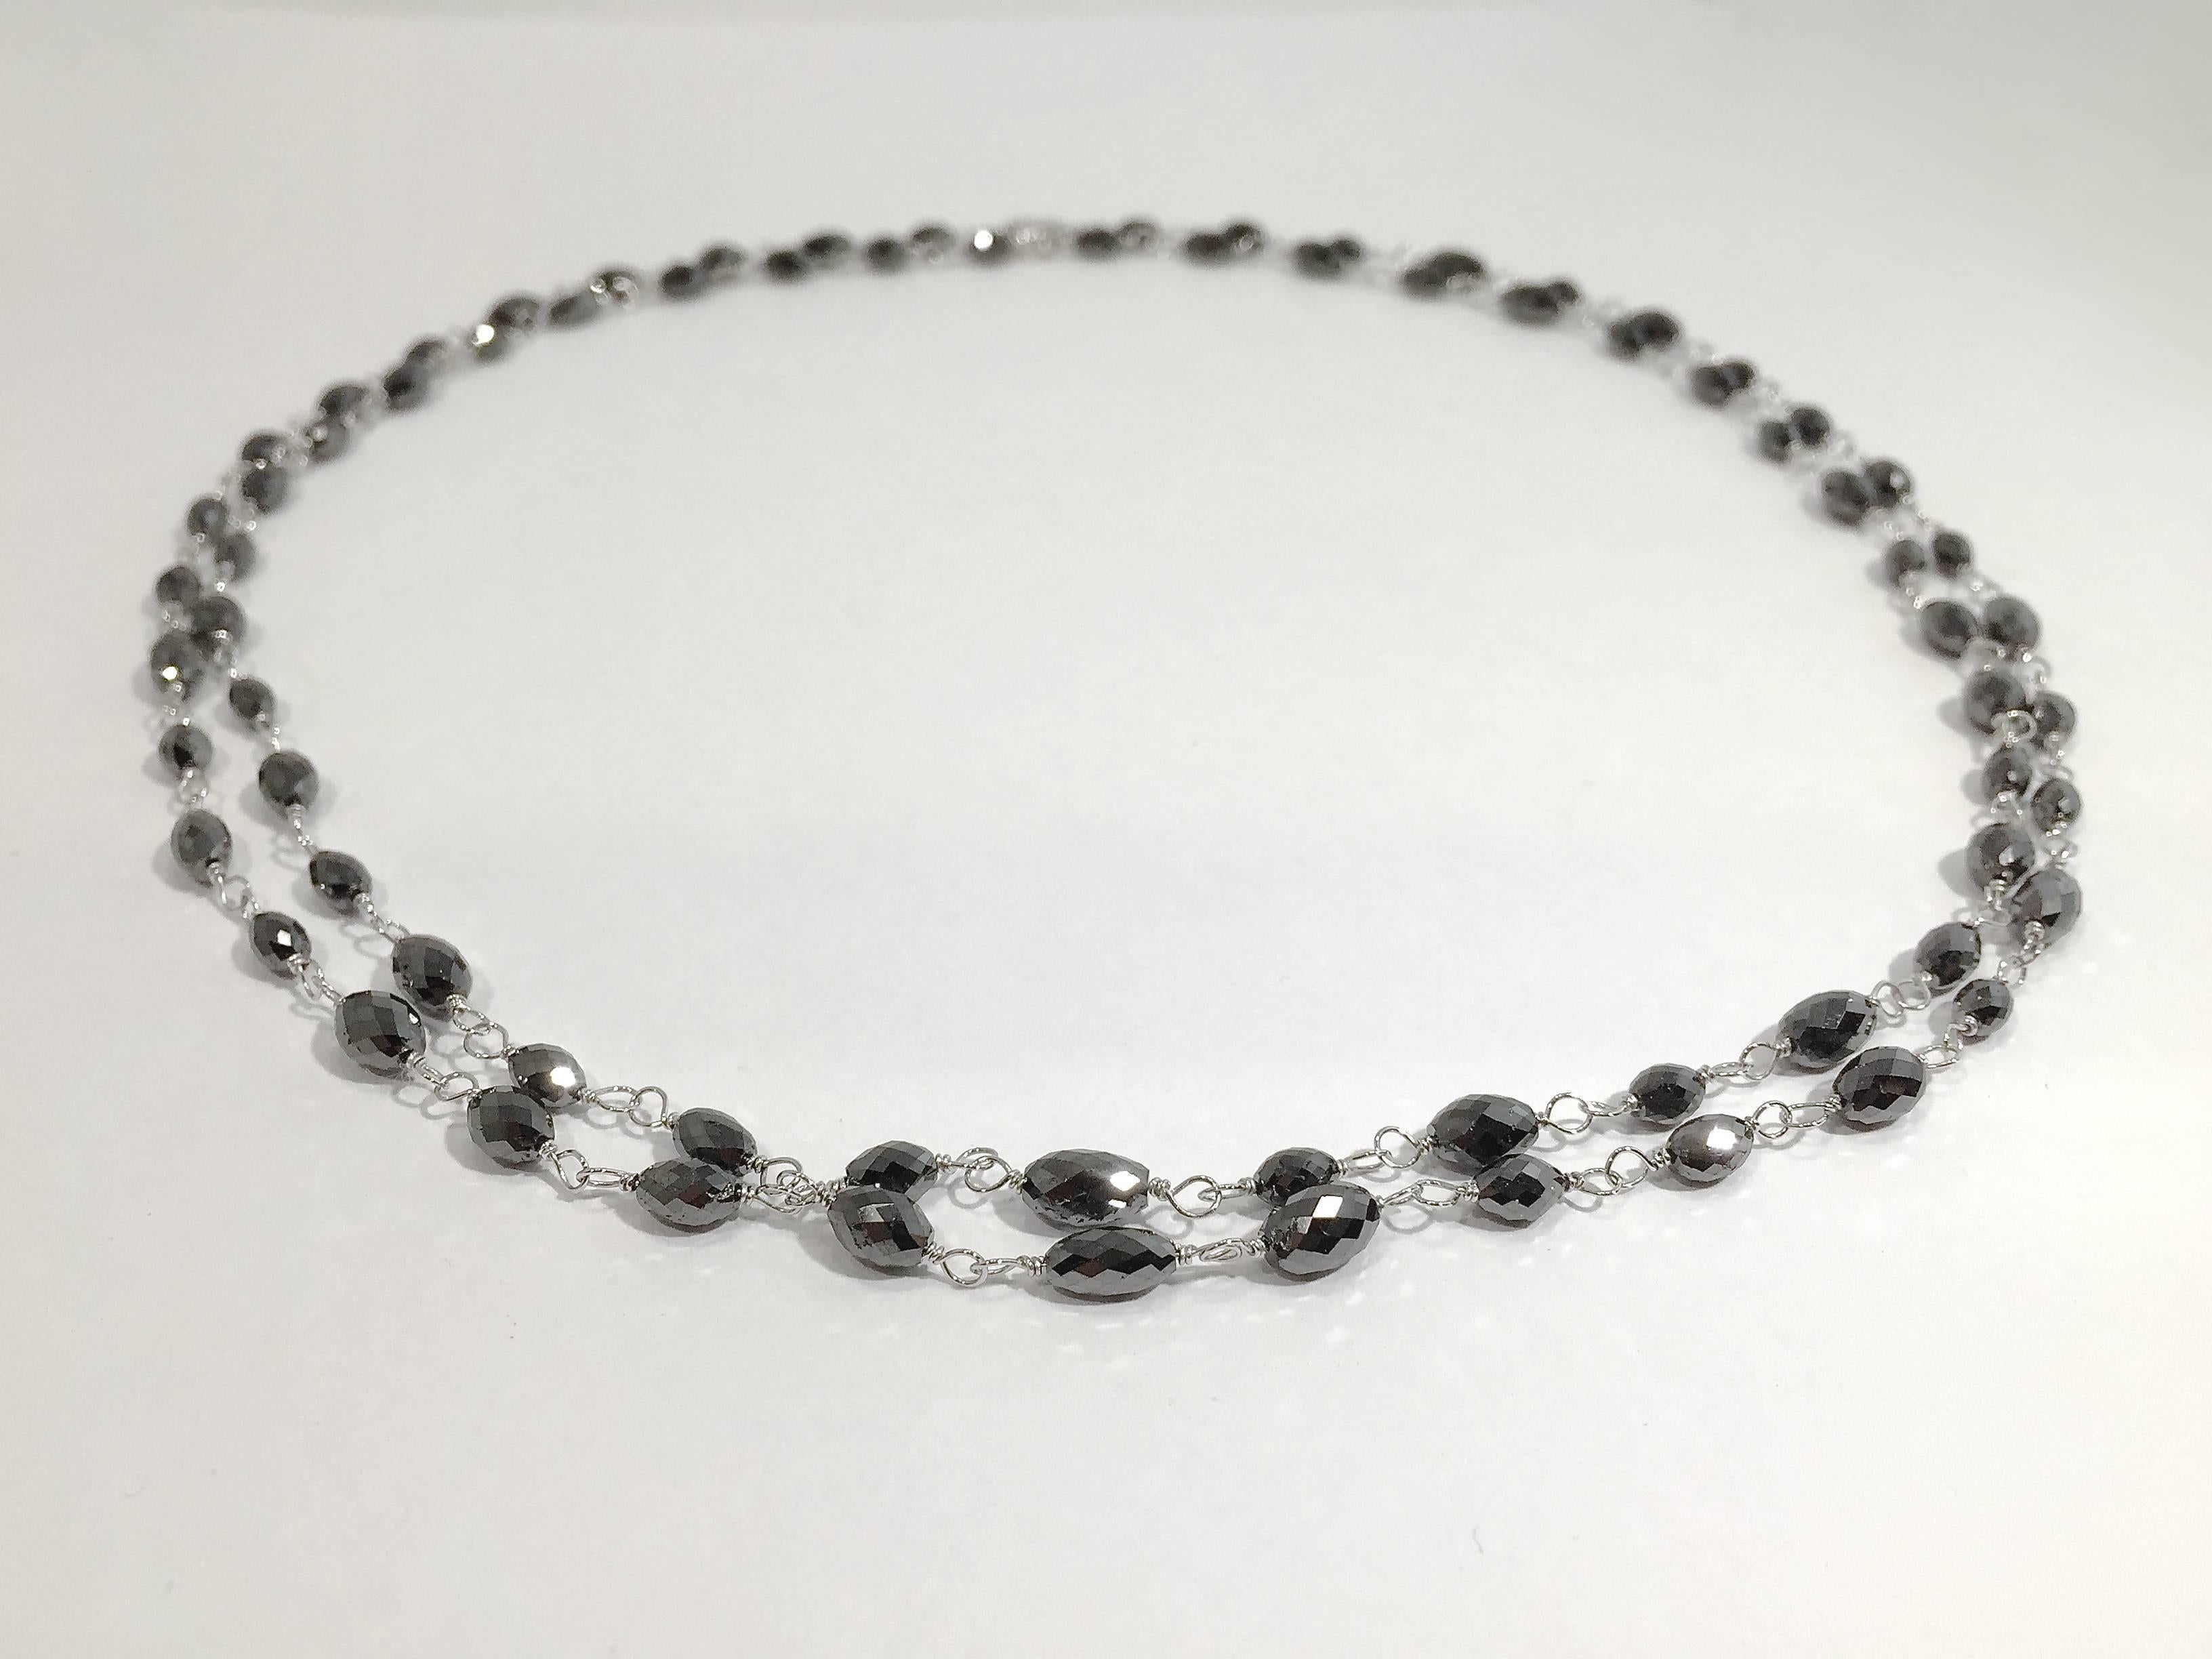 Jona design collection, hand crafted in Italy, 18 Karat white gold oval briolette black diamond 35,43 Inch long necklace. Total diamond weight ct. 49,75.

All Jona jewelry is new and has never been previously owned or worn.. 